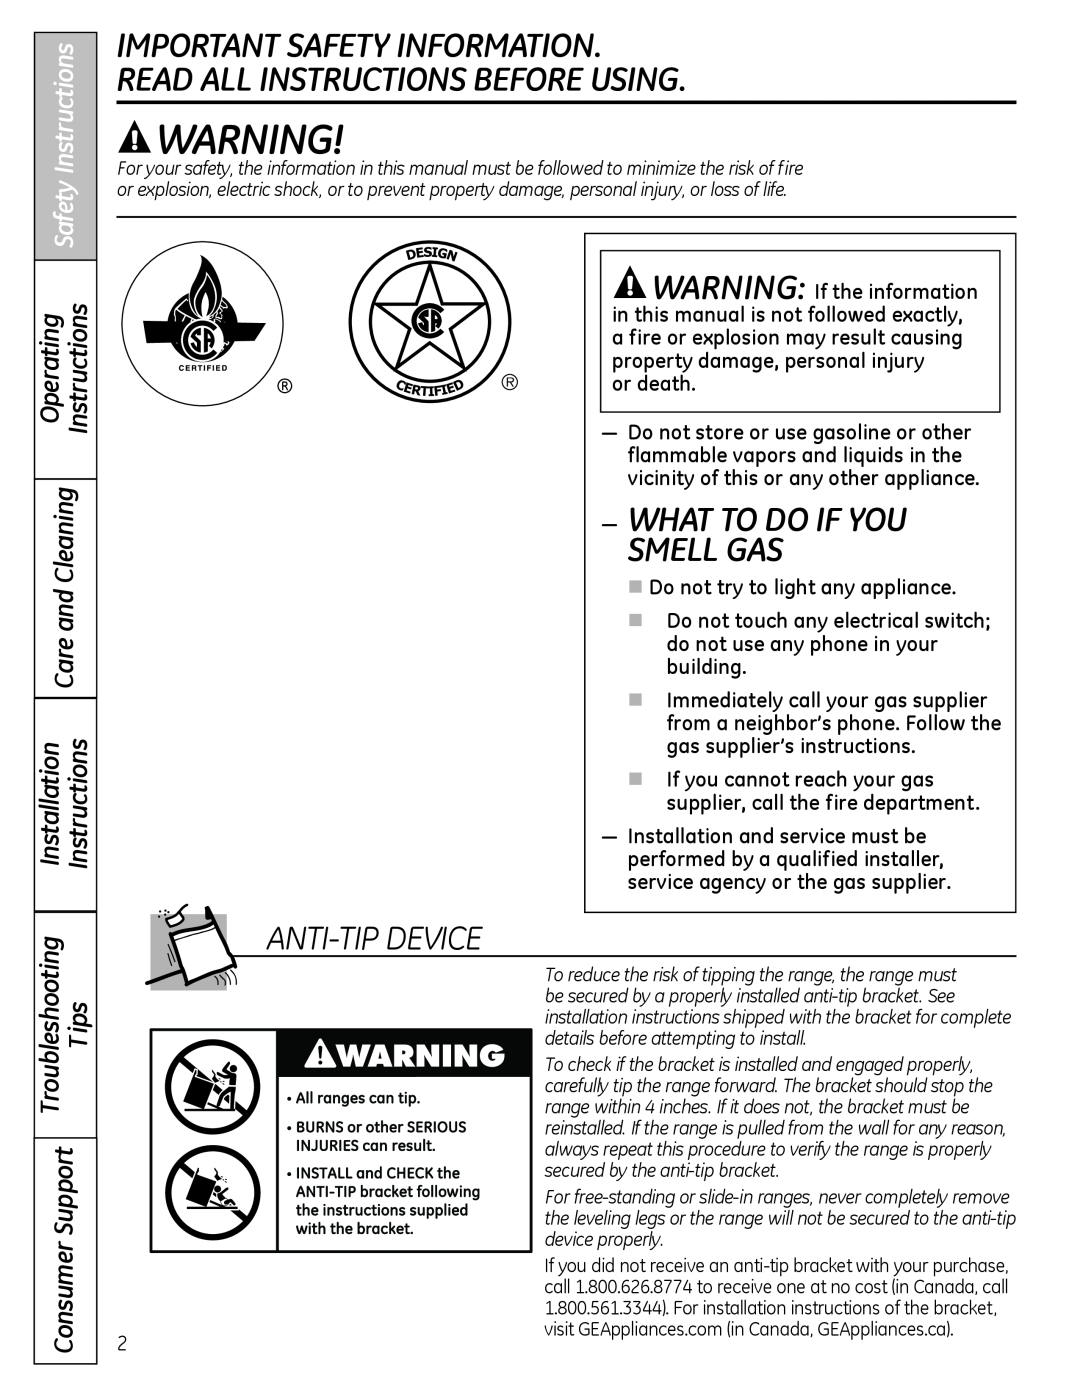 GE JGB3001 Important Safety Information Read All Instructions Before Using, What To Do If You, Smell Gas, aNTI-TIP DeVICe 